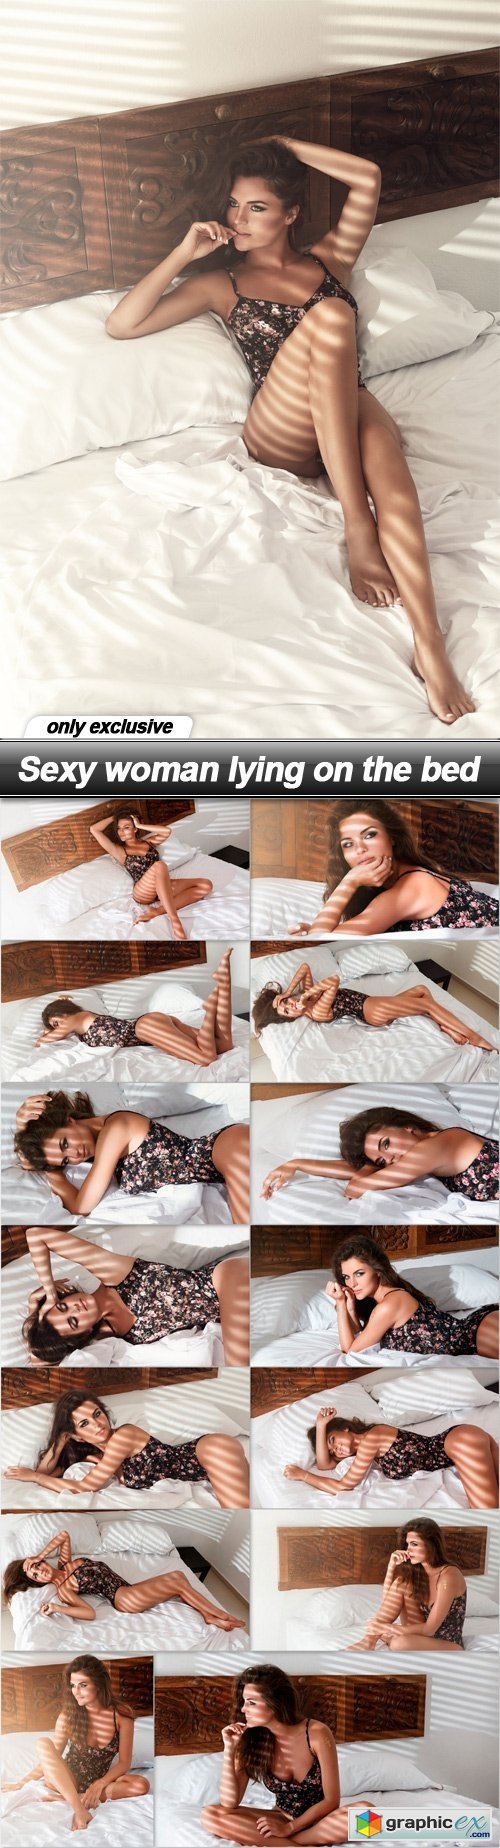 Sexy woman lying on the bed - 15 UHQ JPEG